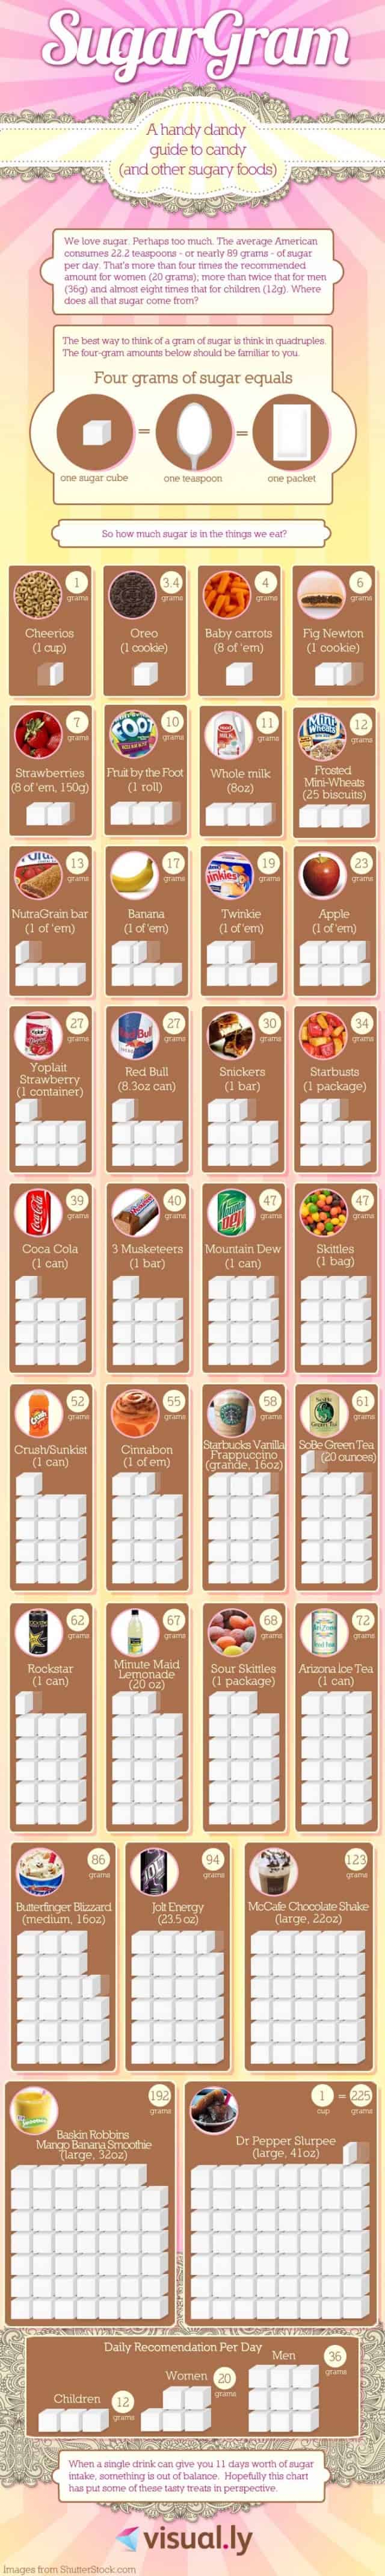 Your Guide to Sugar